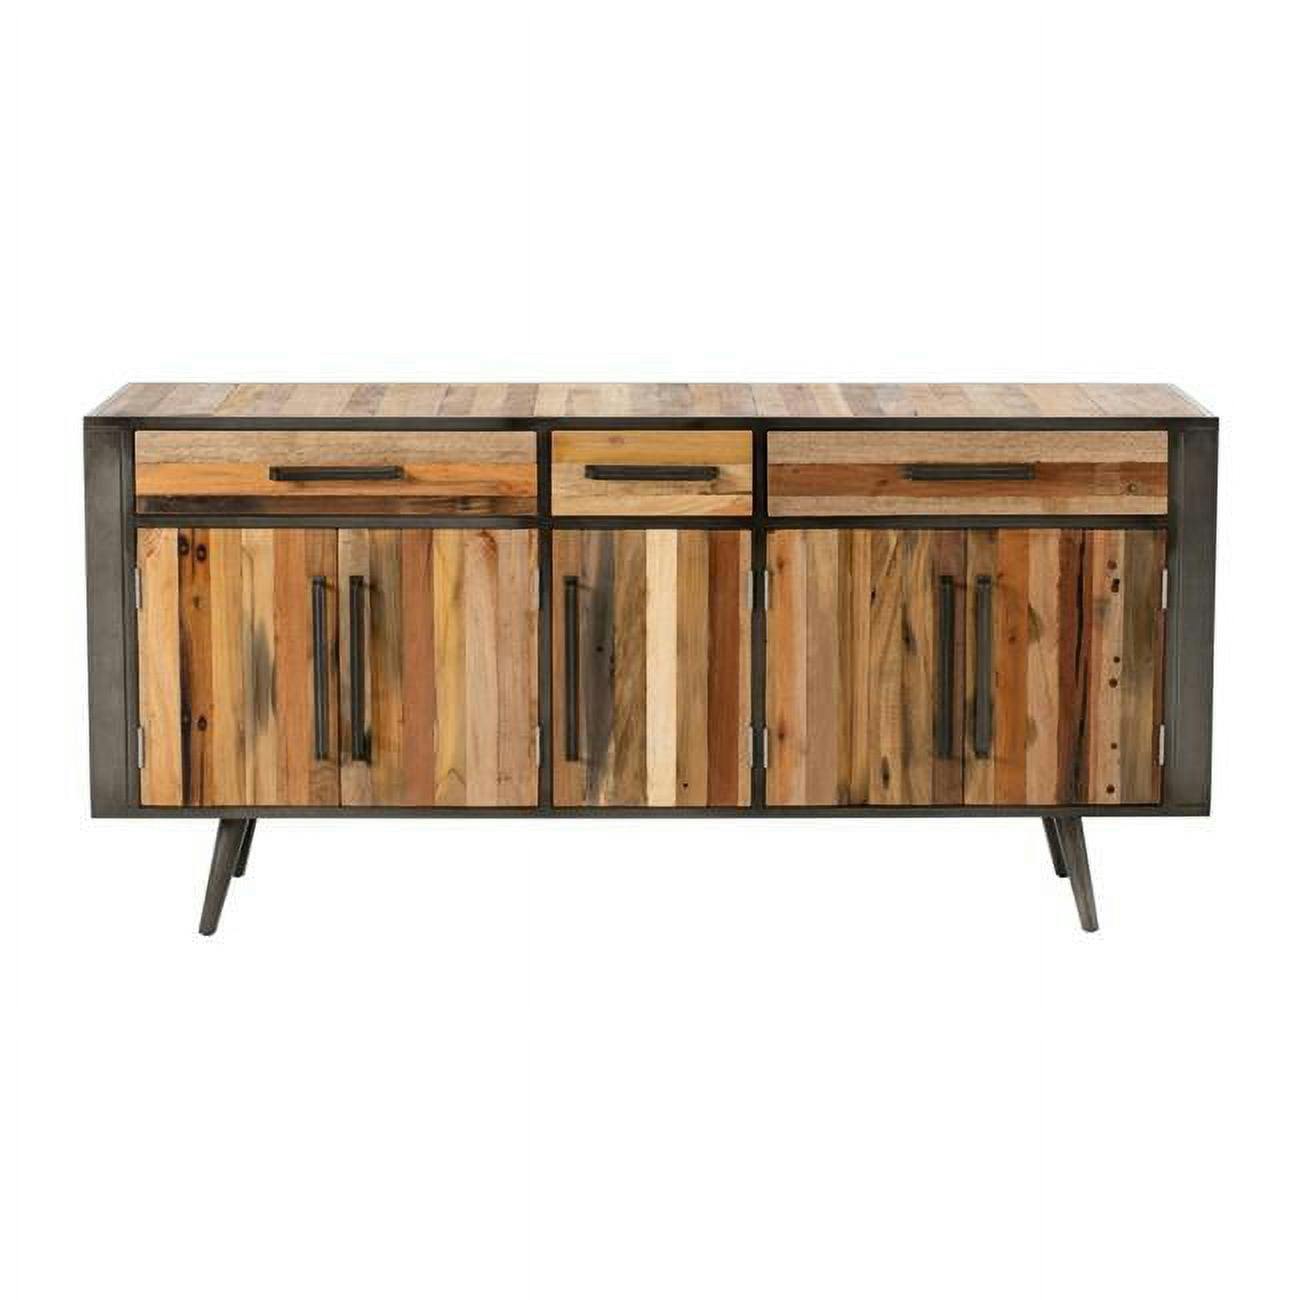 71" Industrial Modern Rustic Natural Wood and Iron Buffet Server